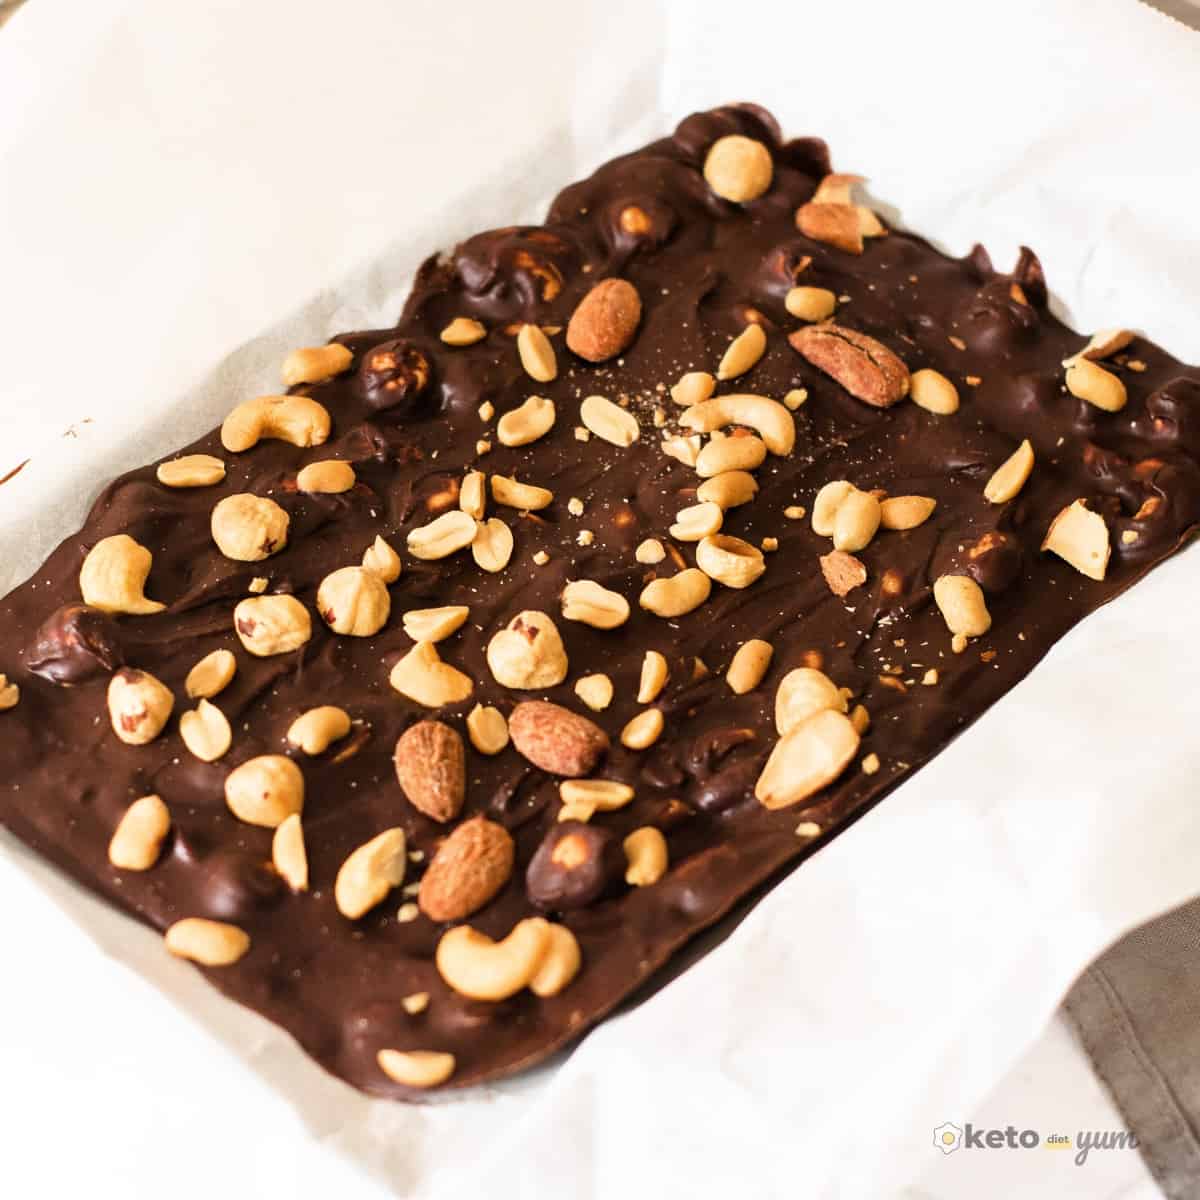 Keto chocolate bars with mixed nuts in lined baking pan